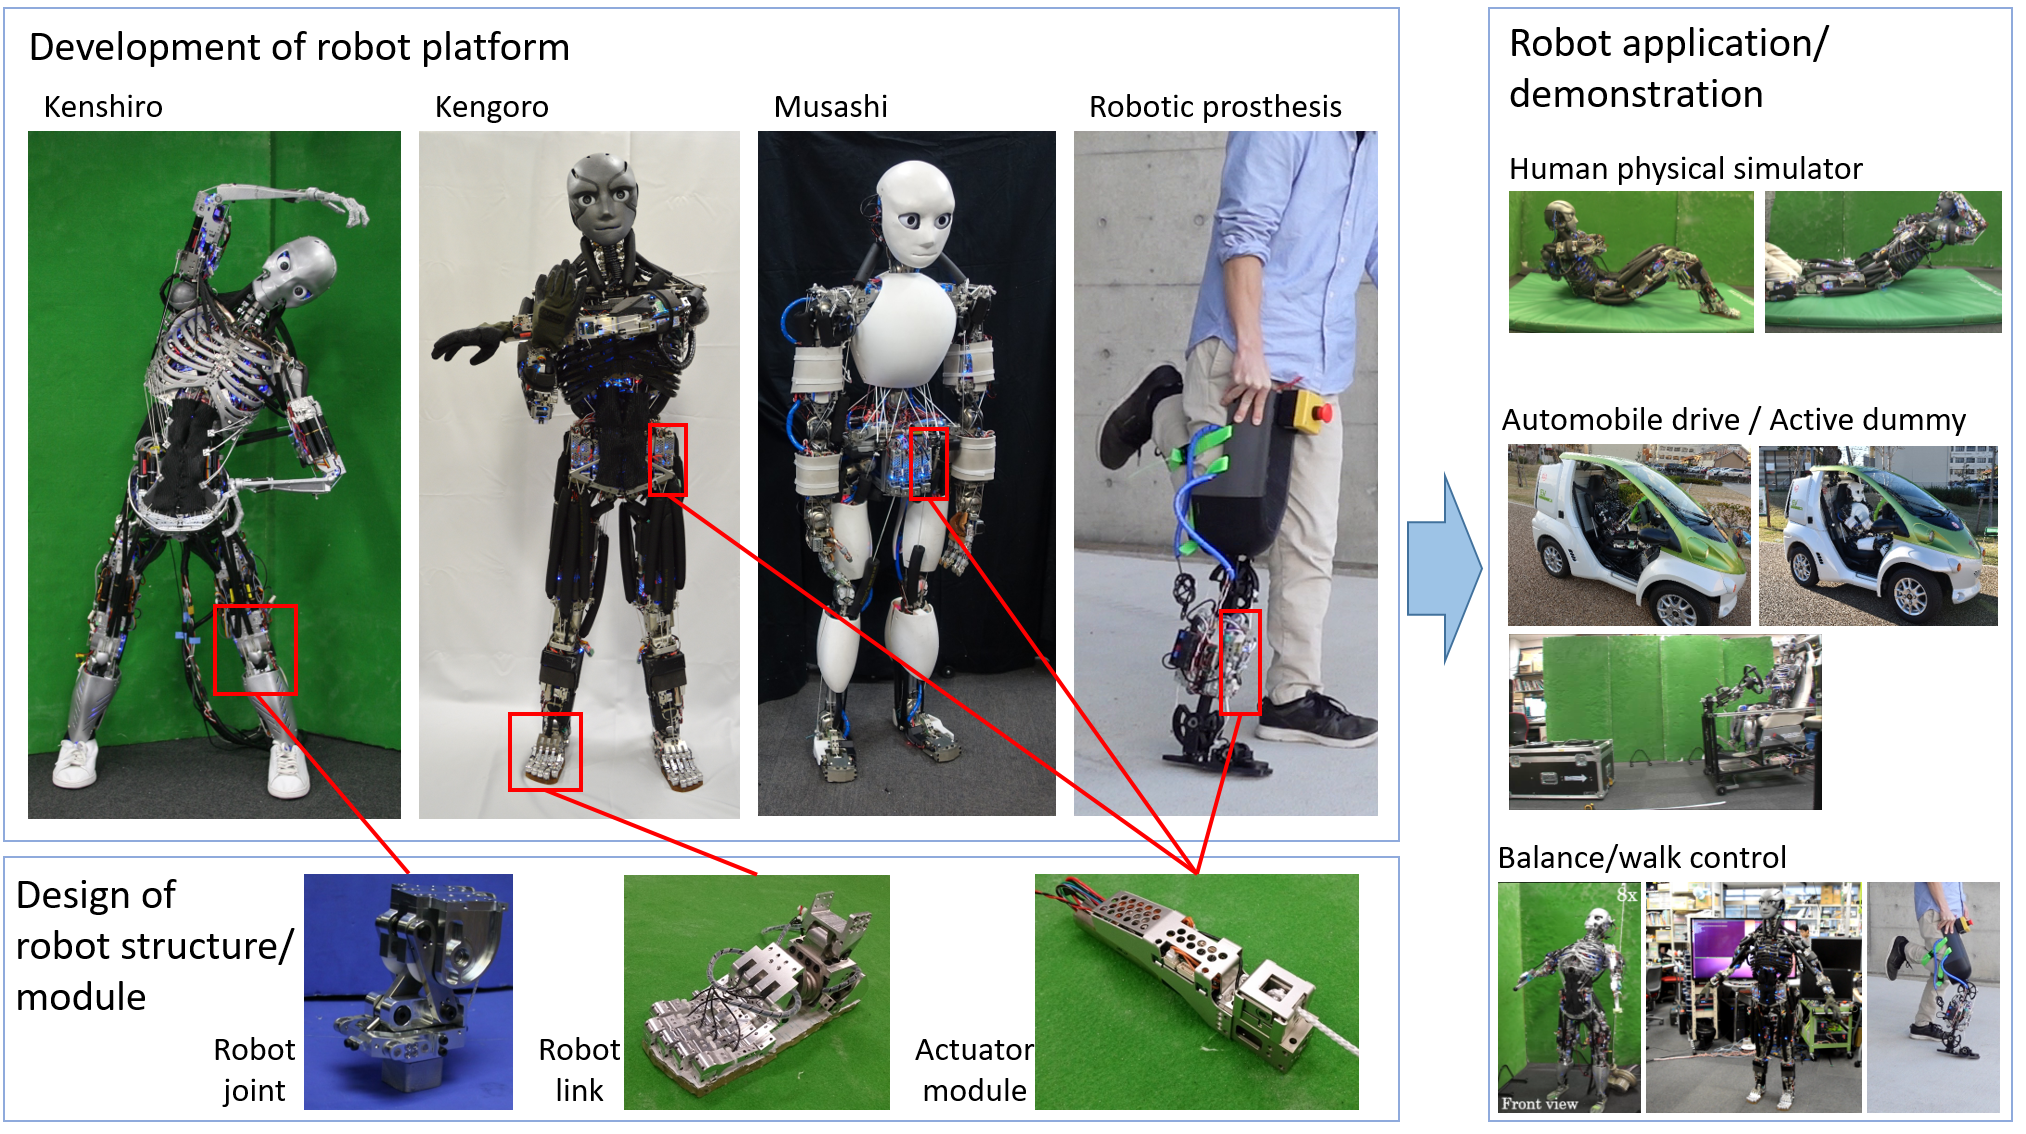 Robot platforms and applications based on robotic hardware elements